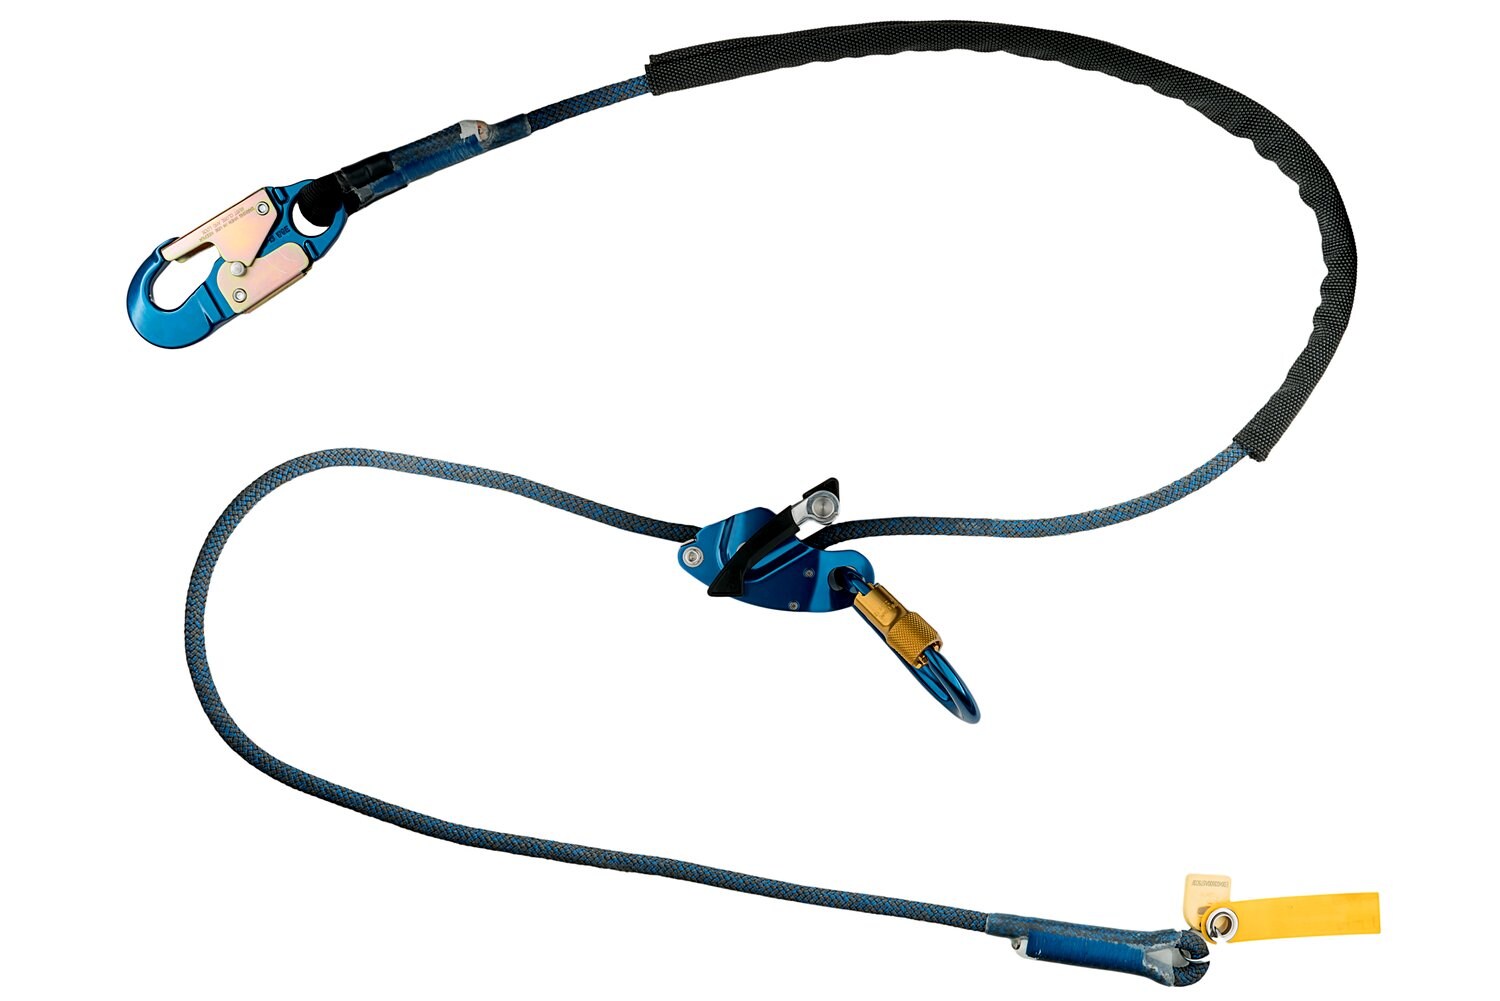 7012817099 - 3M DBI-SALA Trigger X Tie-Back Adjustable Single/Double Mode Rope Positioning Lanyard 1234089, 1/2 in Aramid Kernmantle, 10 ft